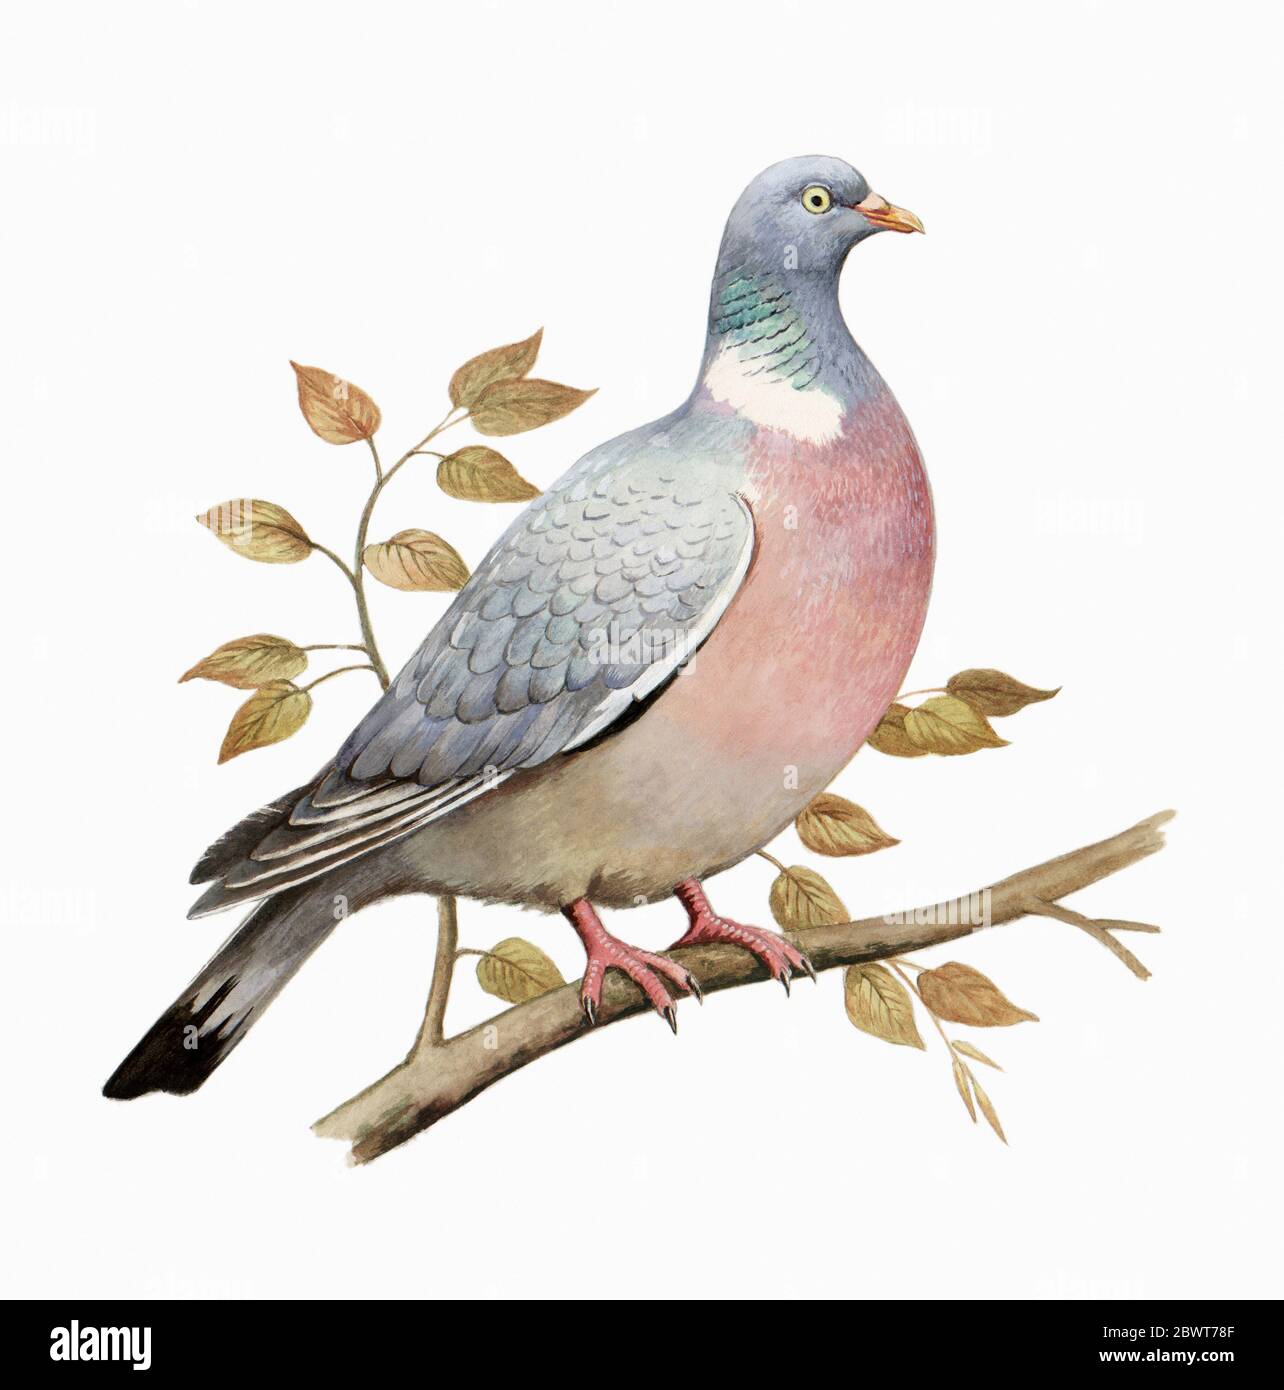 Watercolour painting of wood pigeon Stock Photo